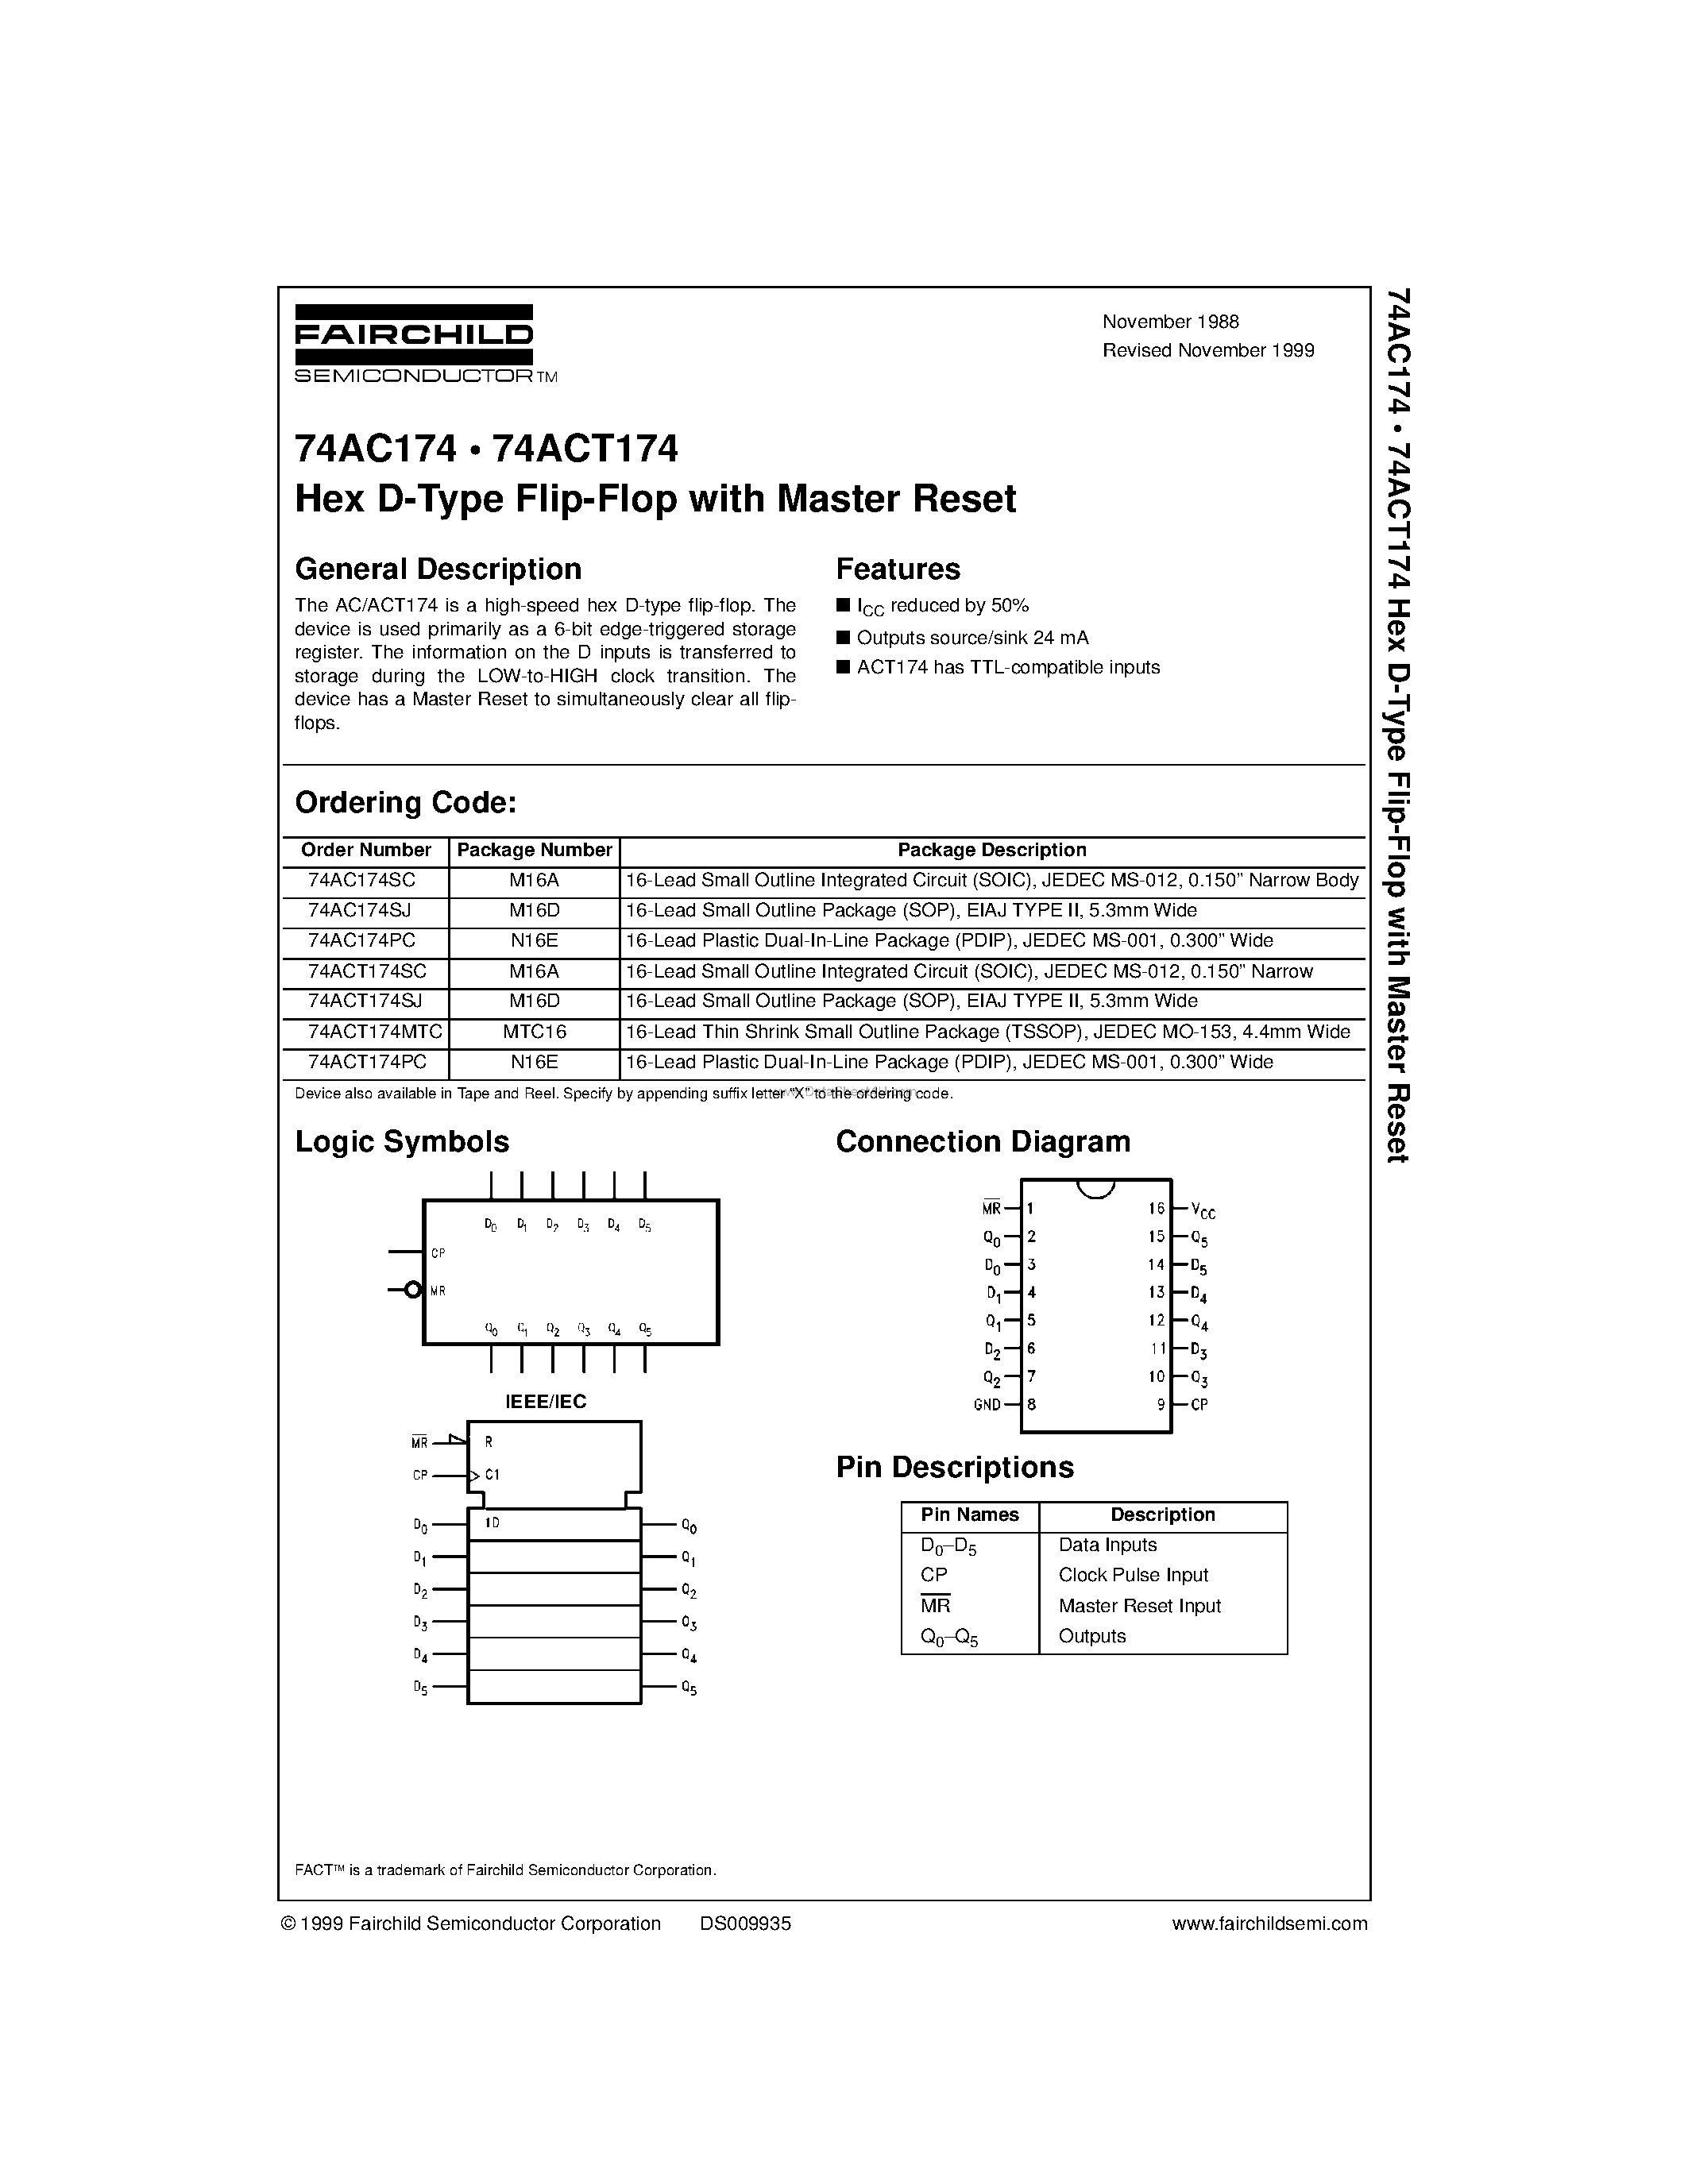 Datasheet 74AC174 - Hex D-Type Flip-Flop with Master Reset page 1